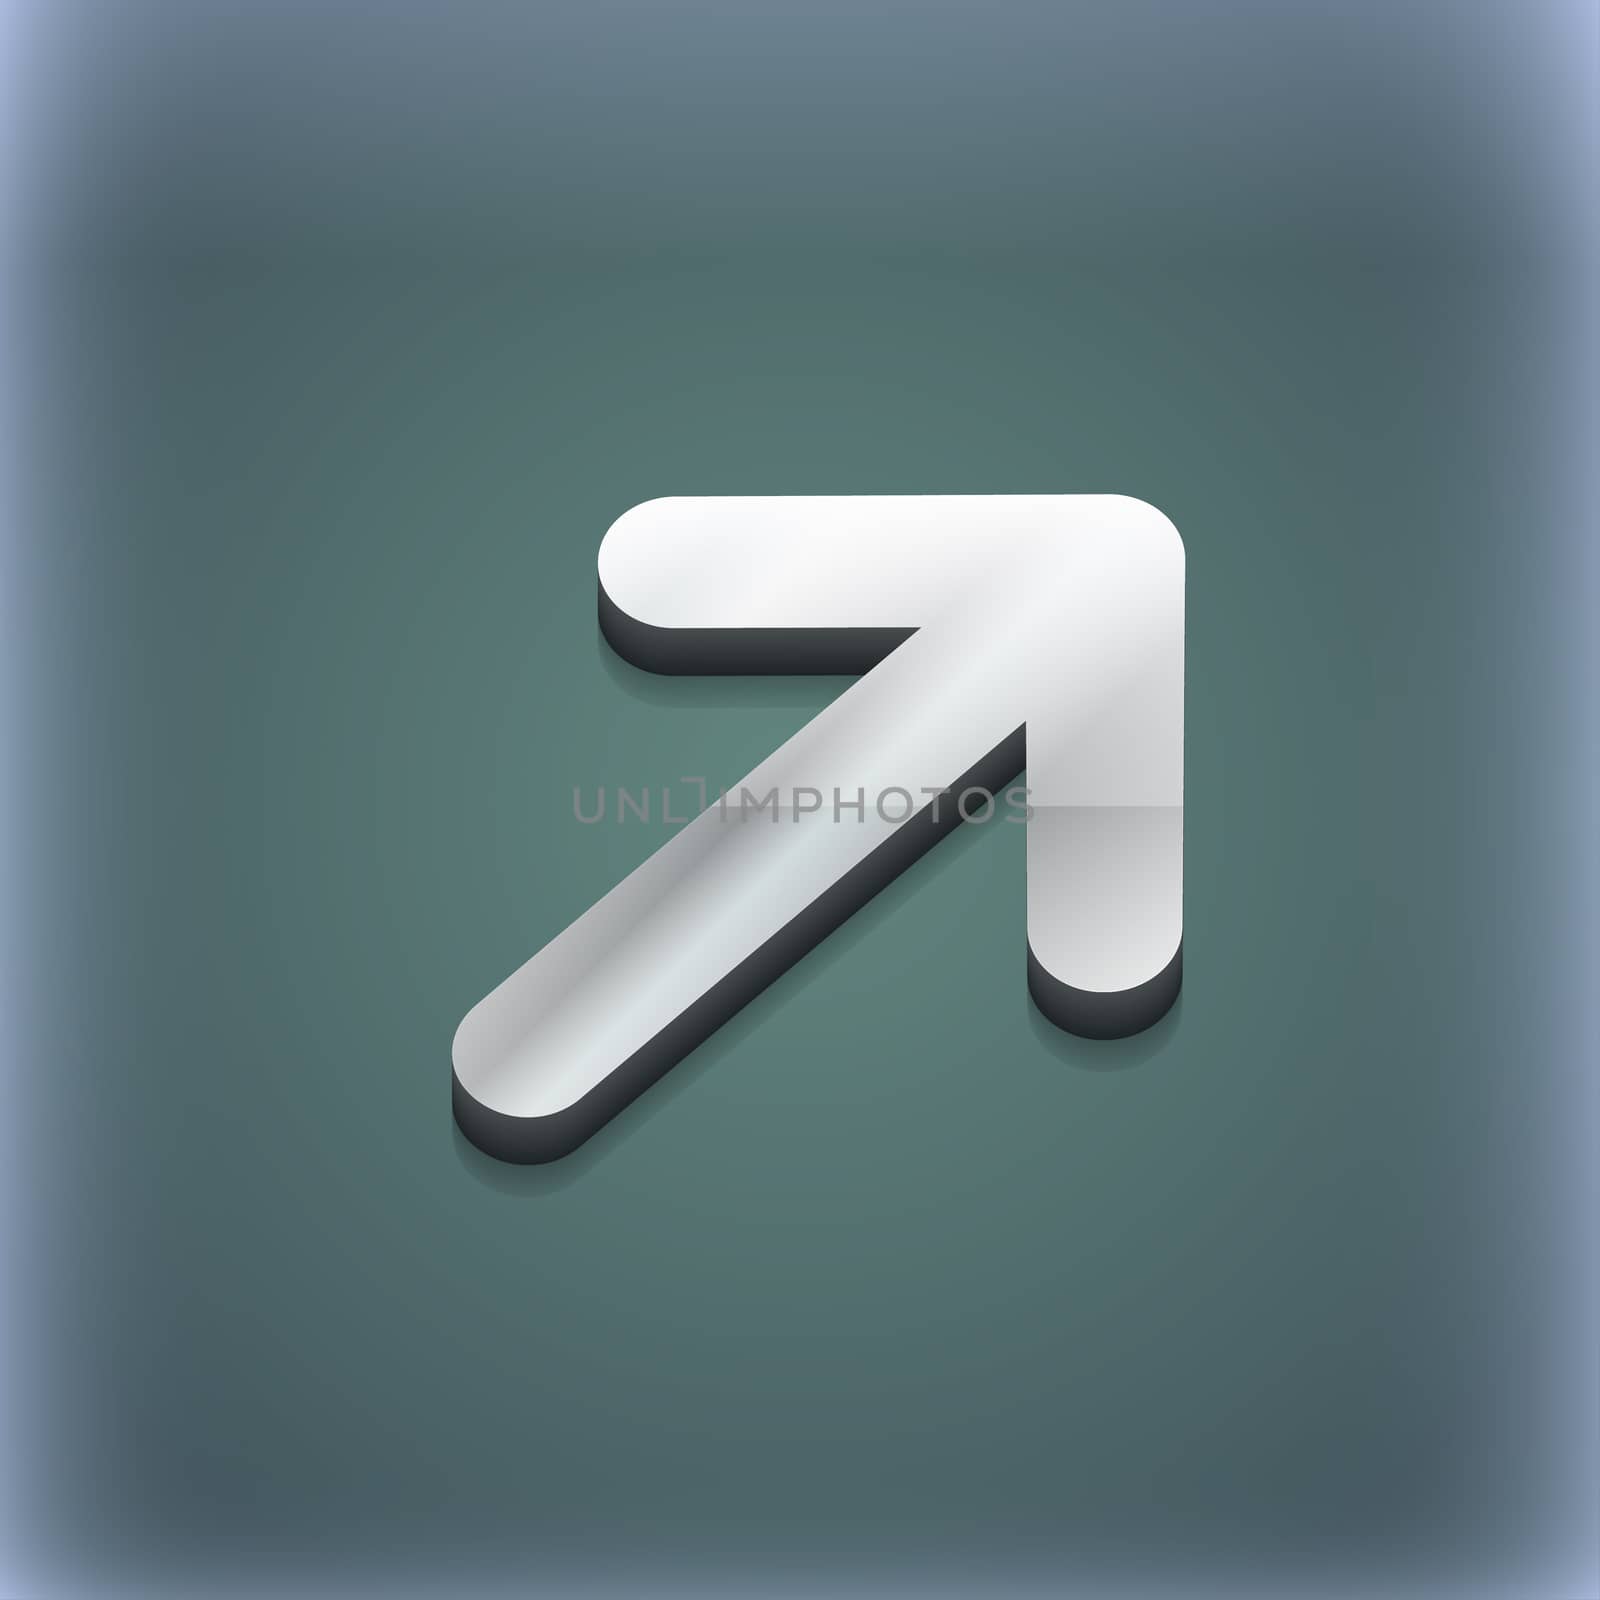 Arrow Expand Full screen Scale icon symbol. 3D style. Trendy, modern design with space for your text illustration. Raster version